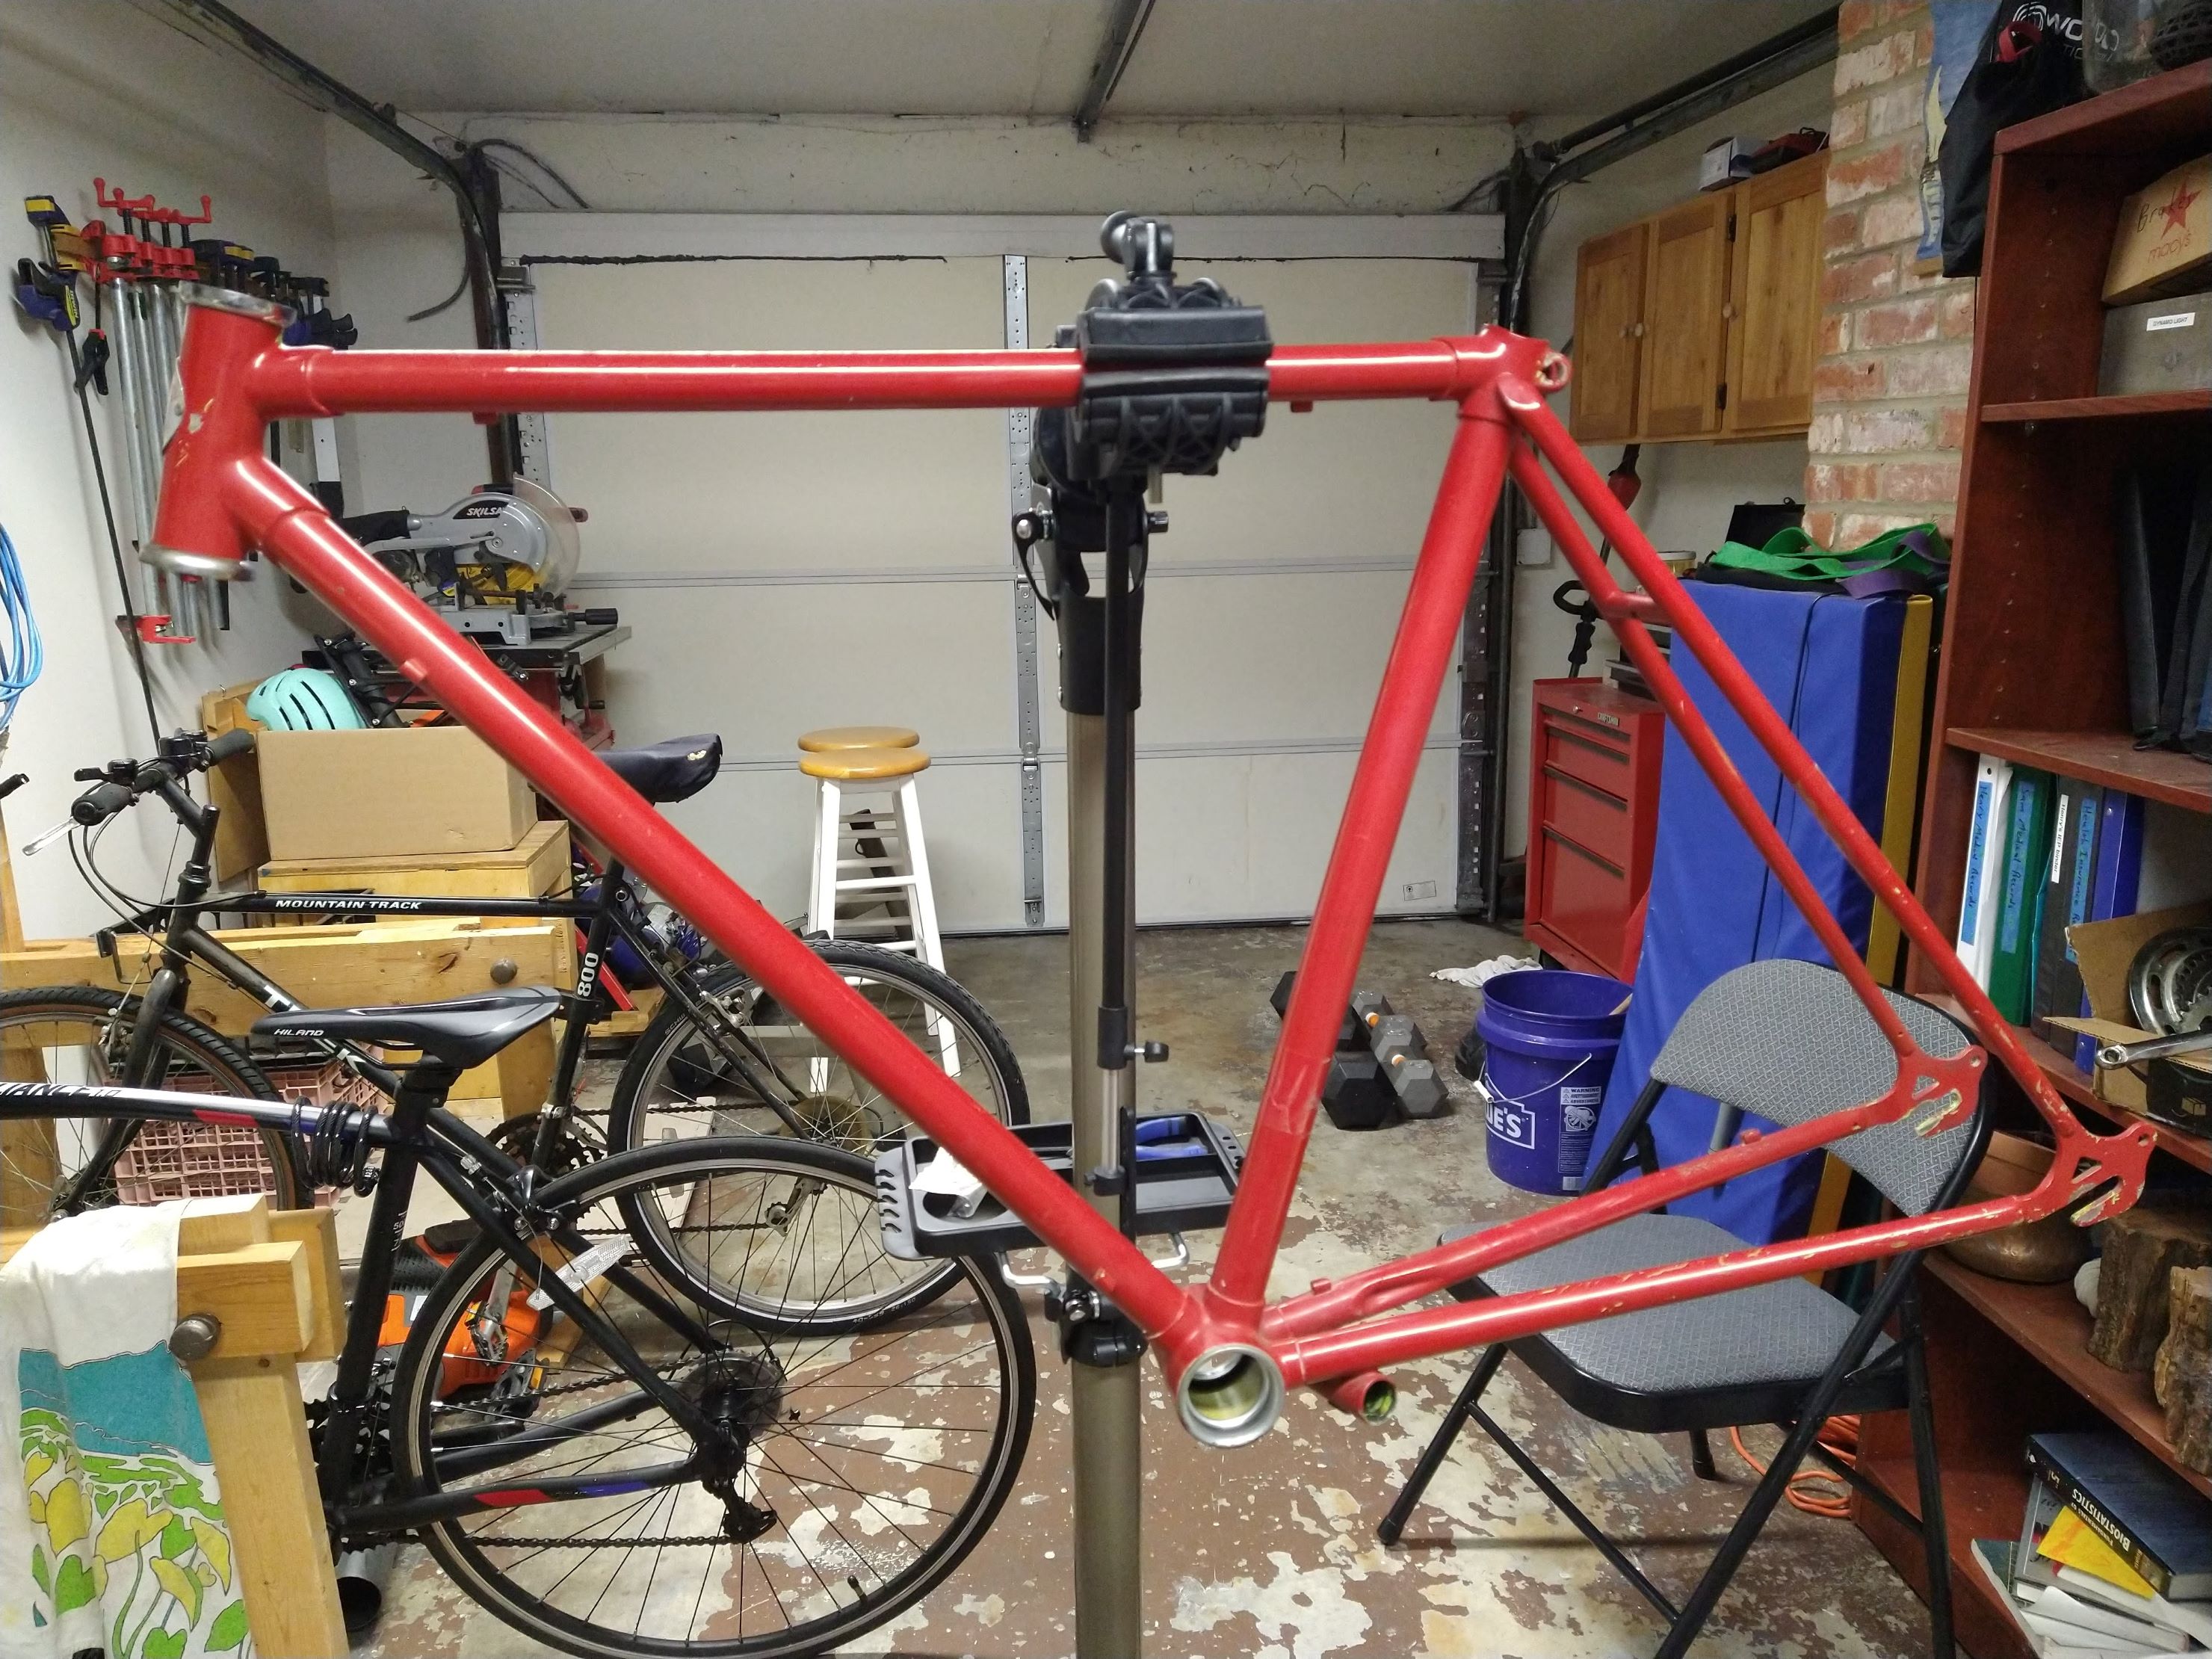 image of a bare bike frame in a stand in a messy garage